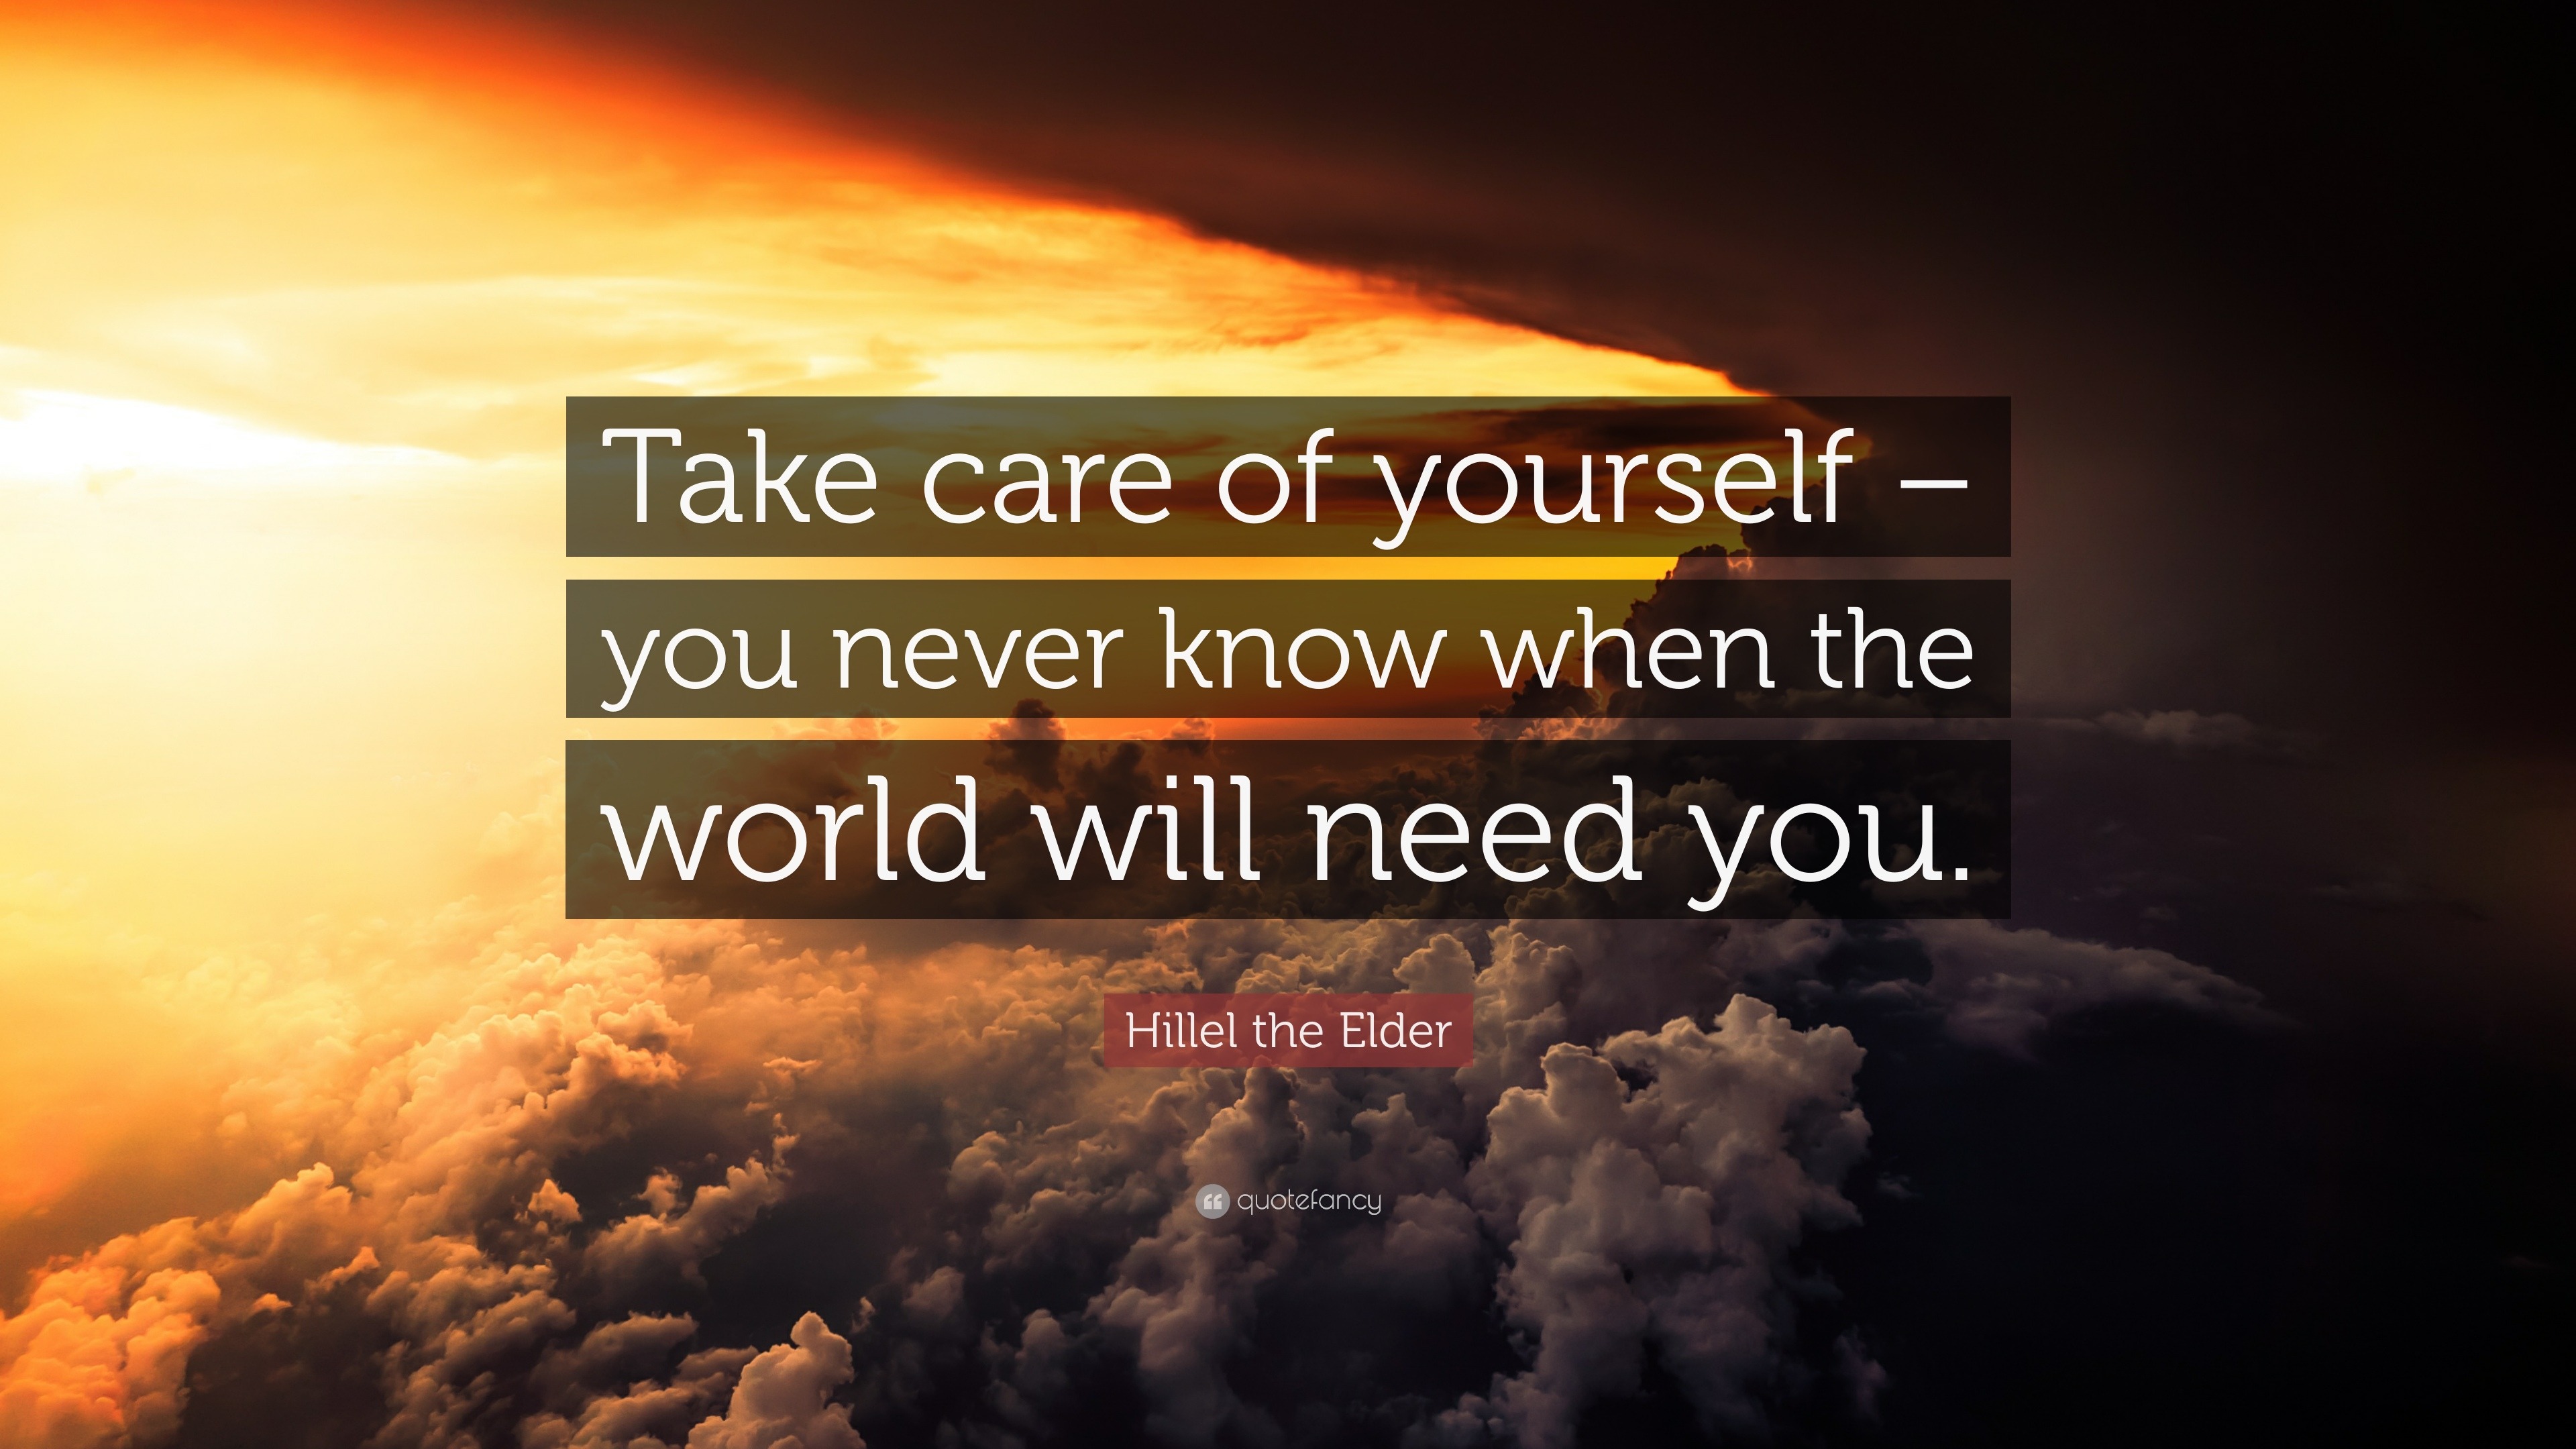 Hillel the Elder Quote “Take care of yourself you never know when